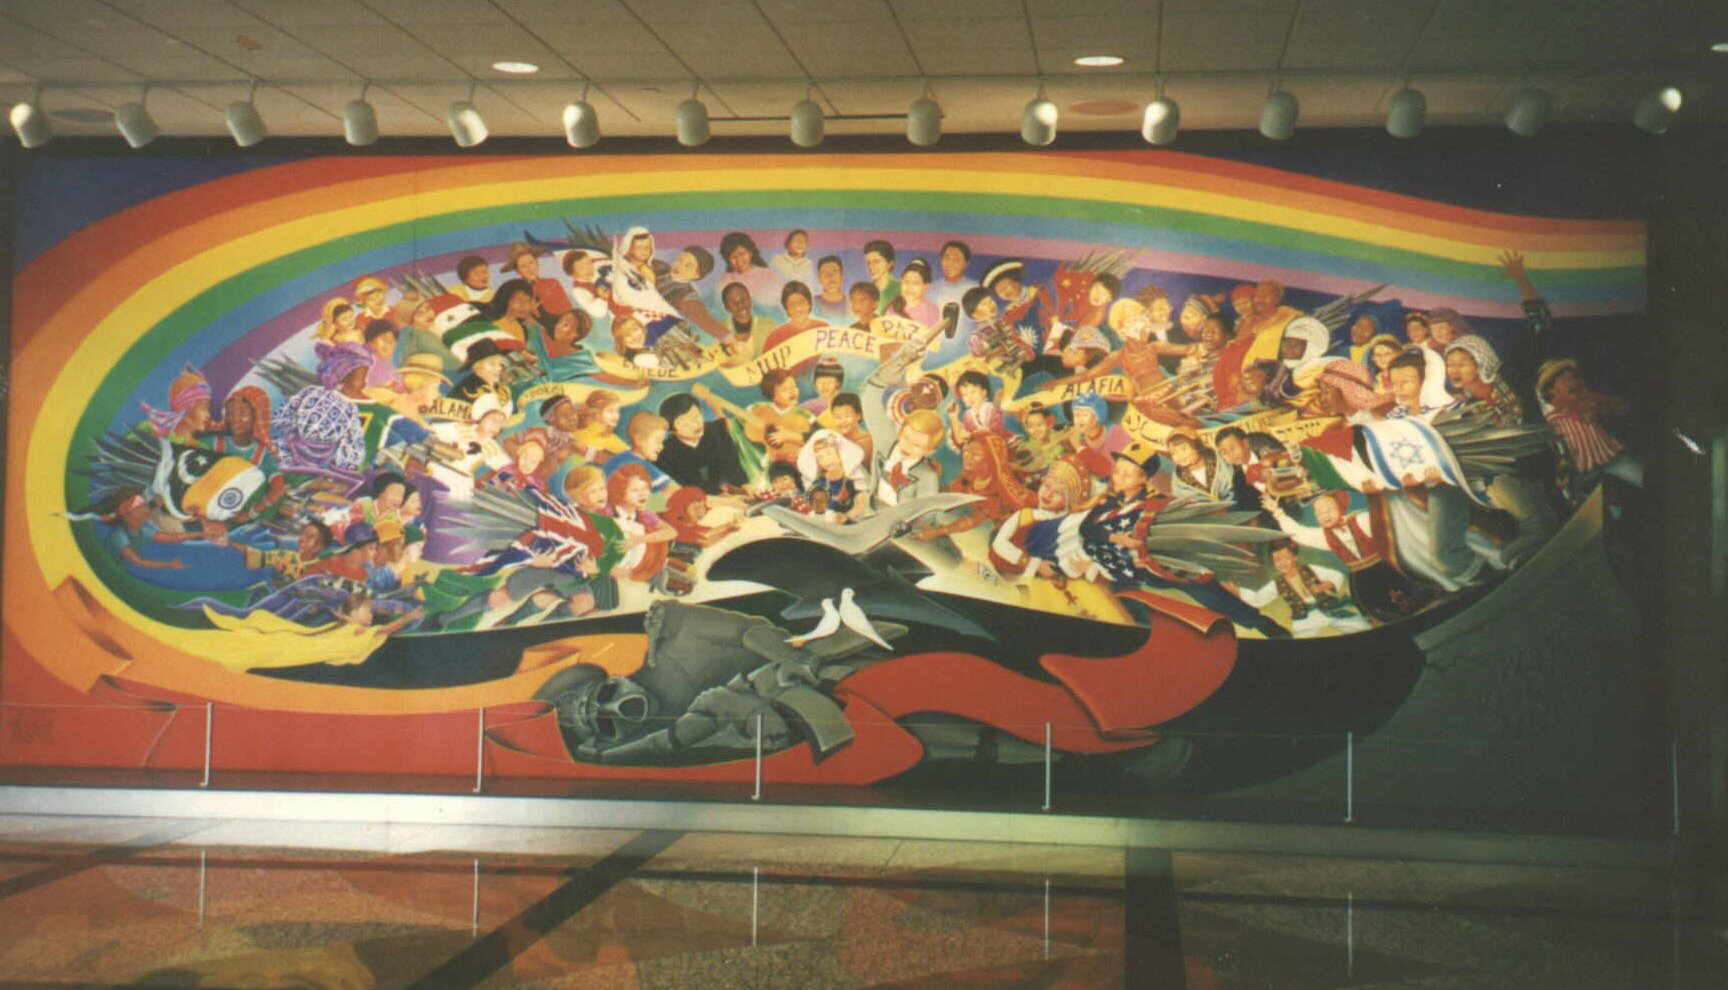 Denver Airport paintings and Nuclear War - Survivalist Forum